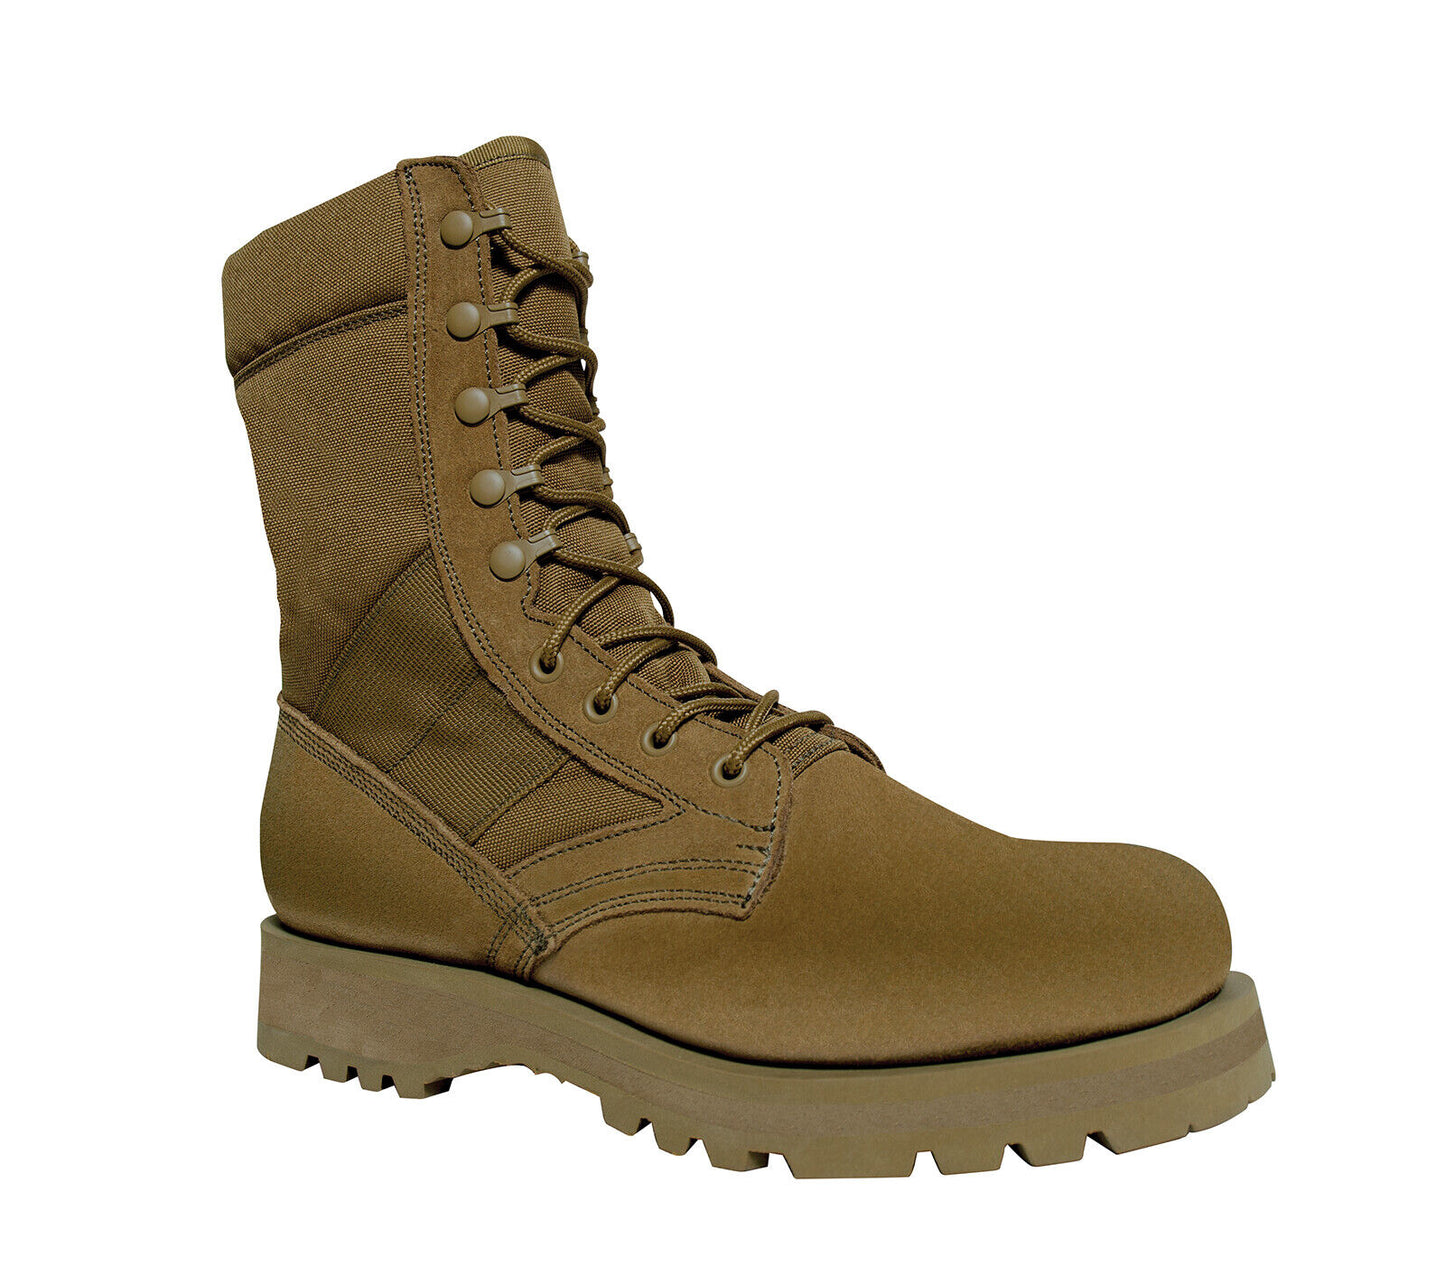 Rothco G.I. Type Sierra Sole Coyote Brown Tactical Boots Footwear